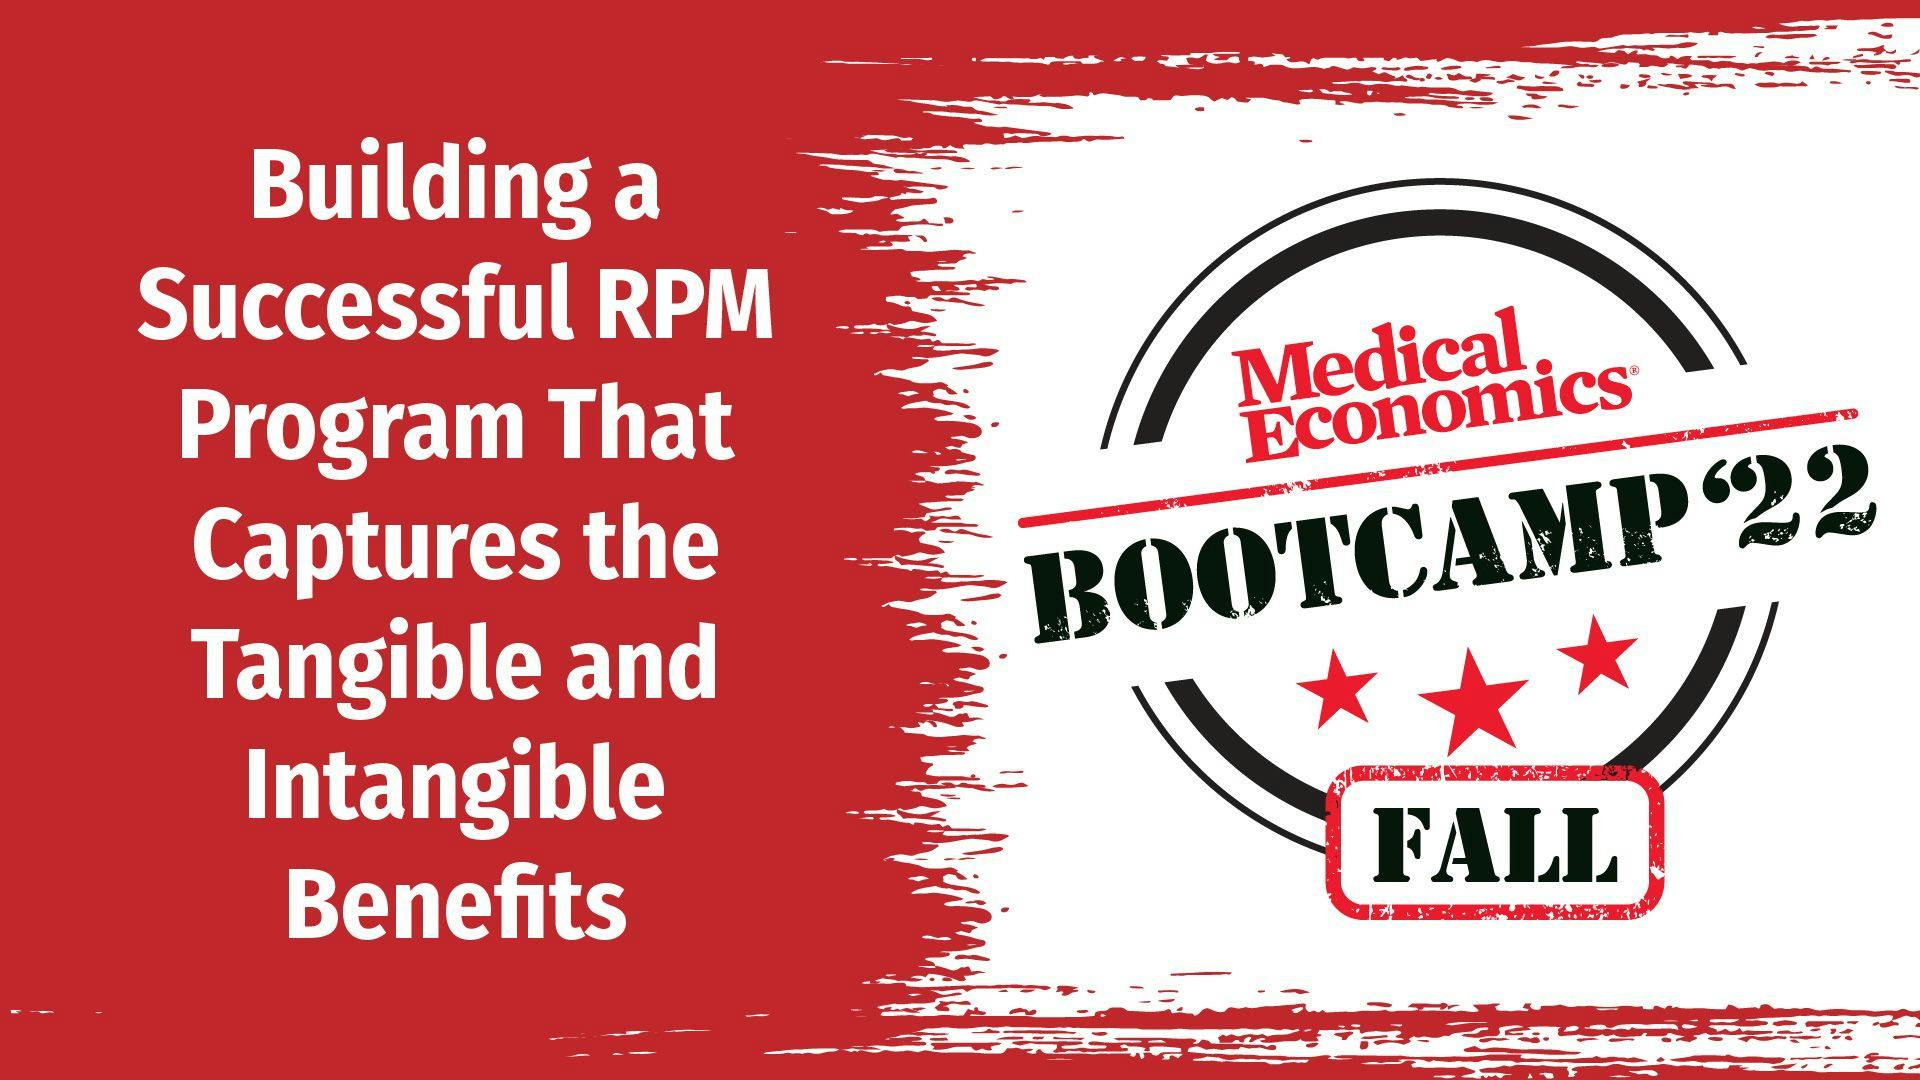 Building a Successful RPM Program that Captures the Tangible and Intangible Benefits